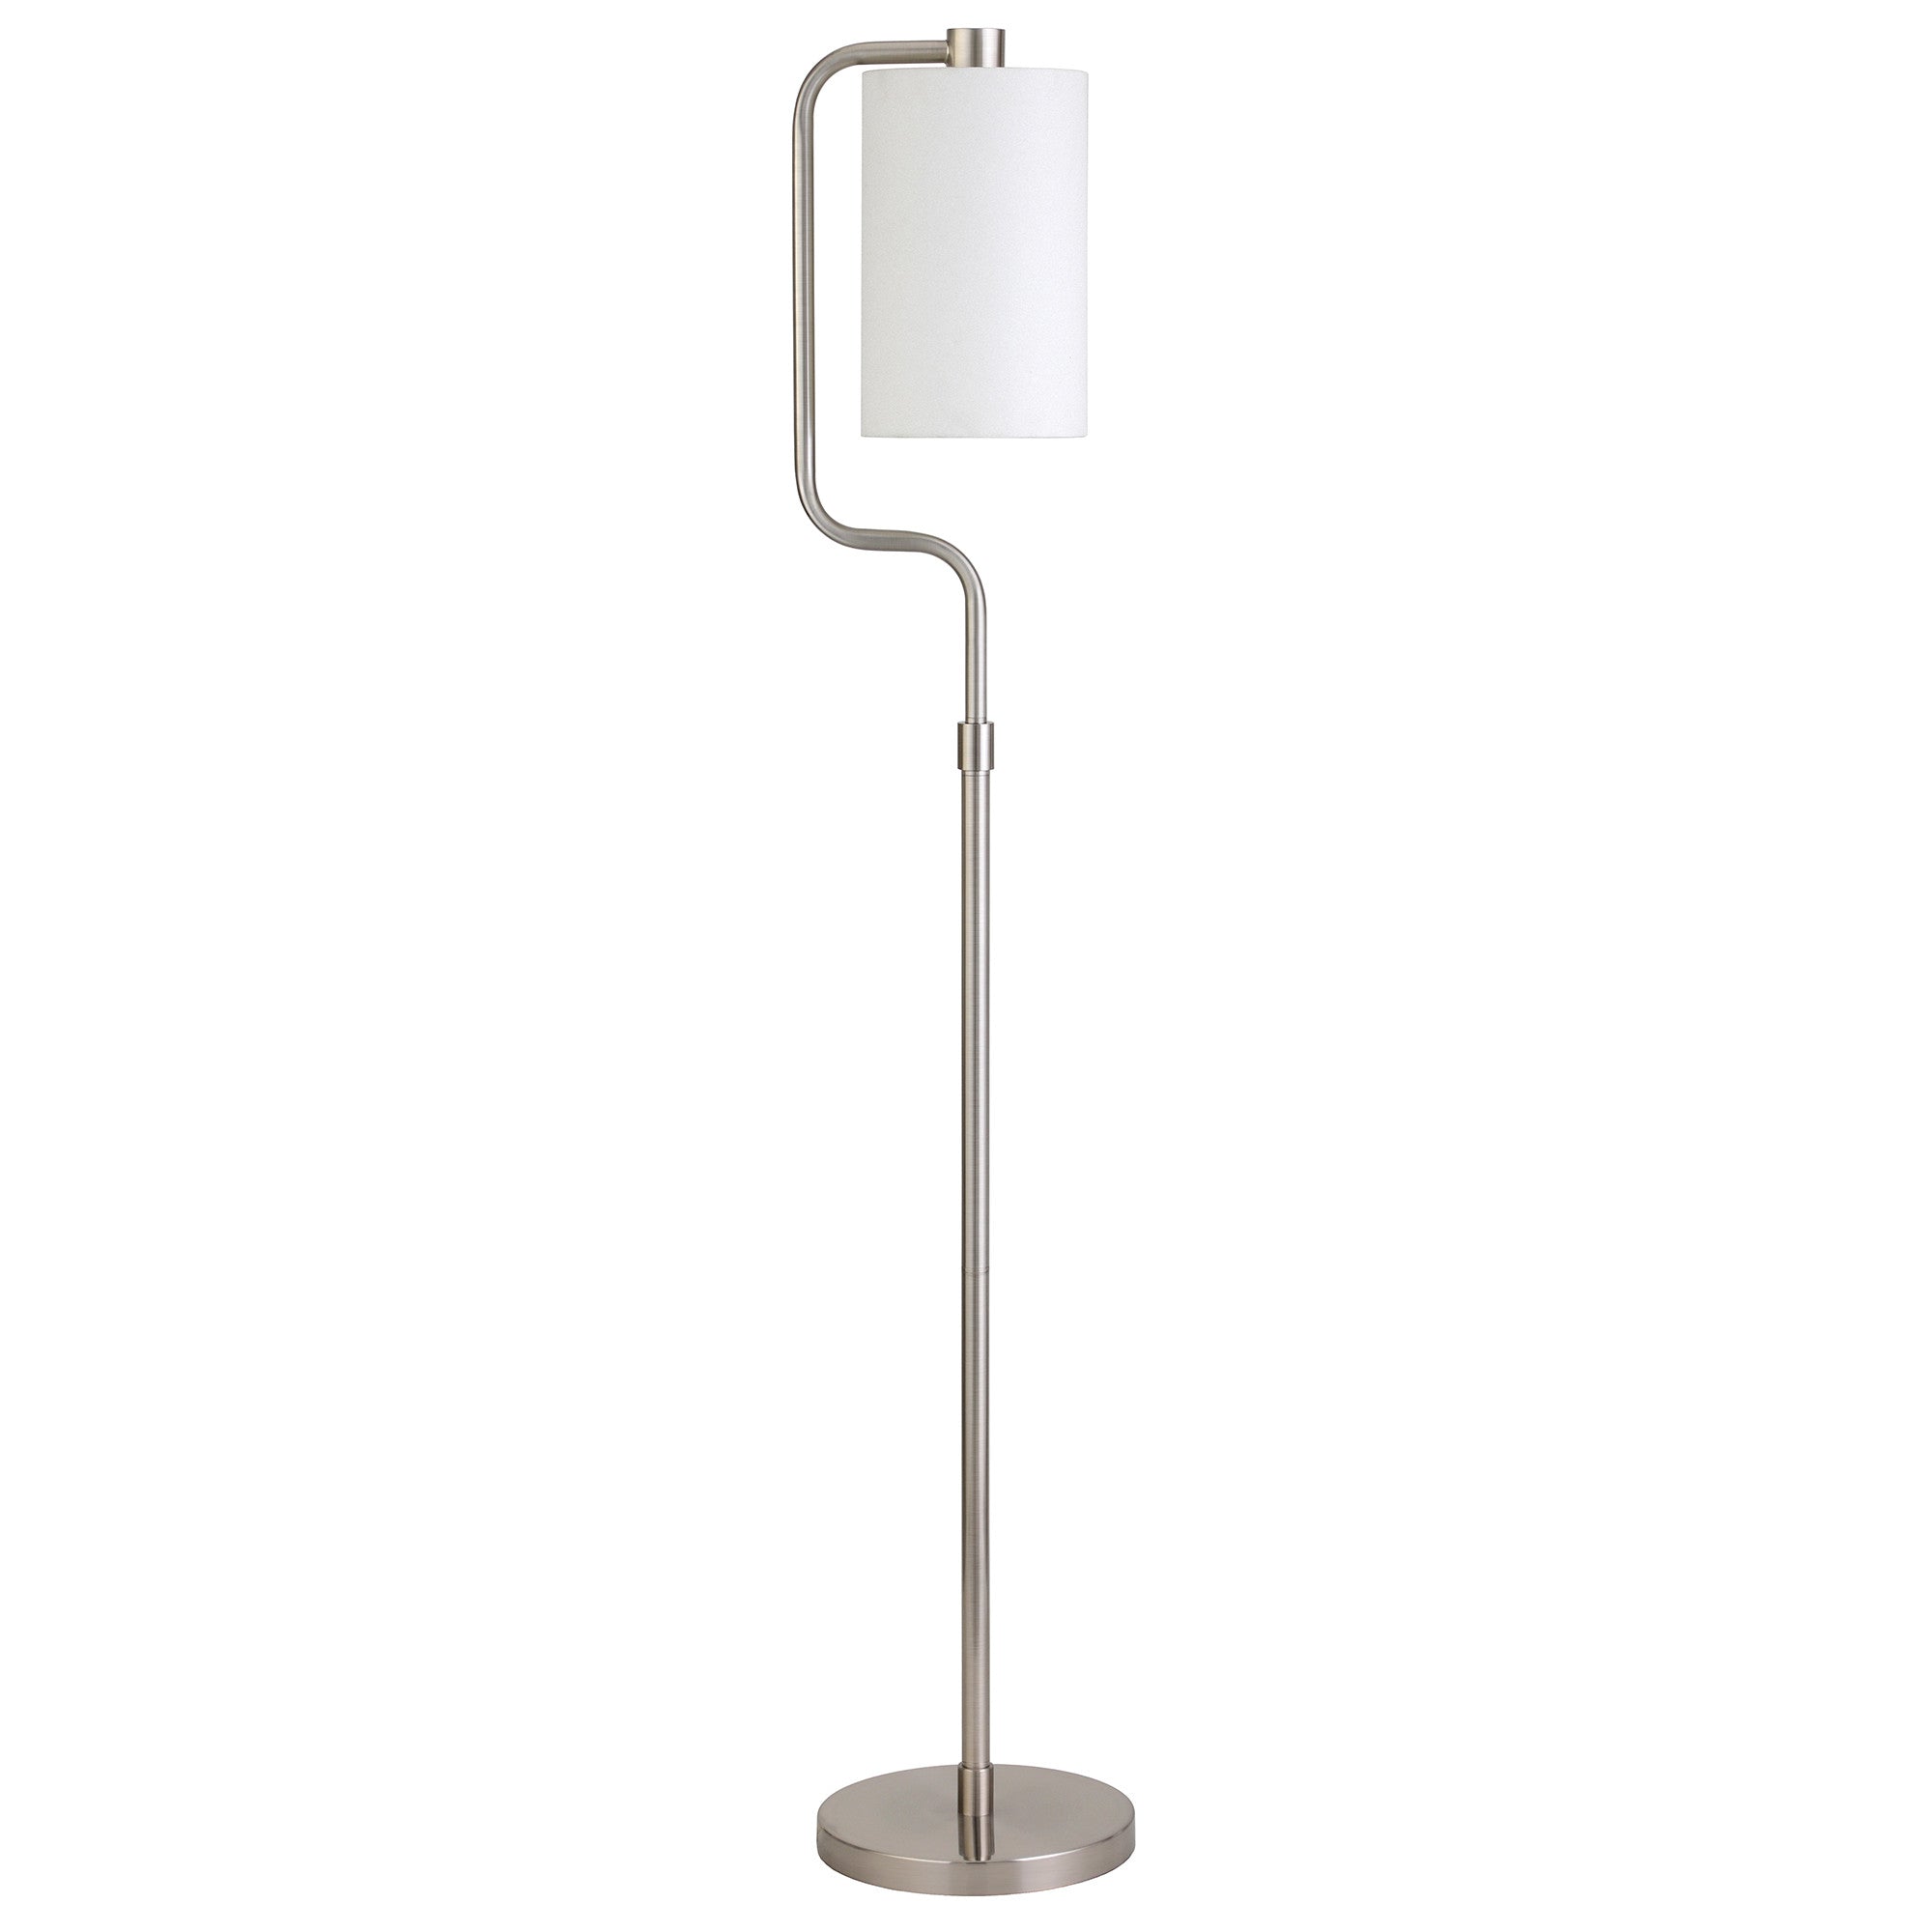 62" Nickel Reading Floor Lamp With White Frosted Glass Drum Shade